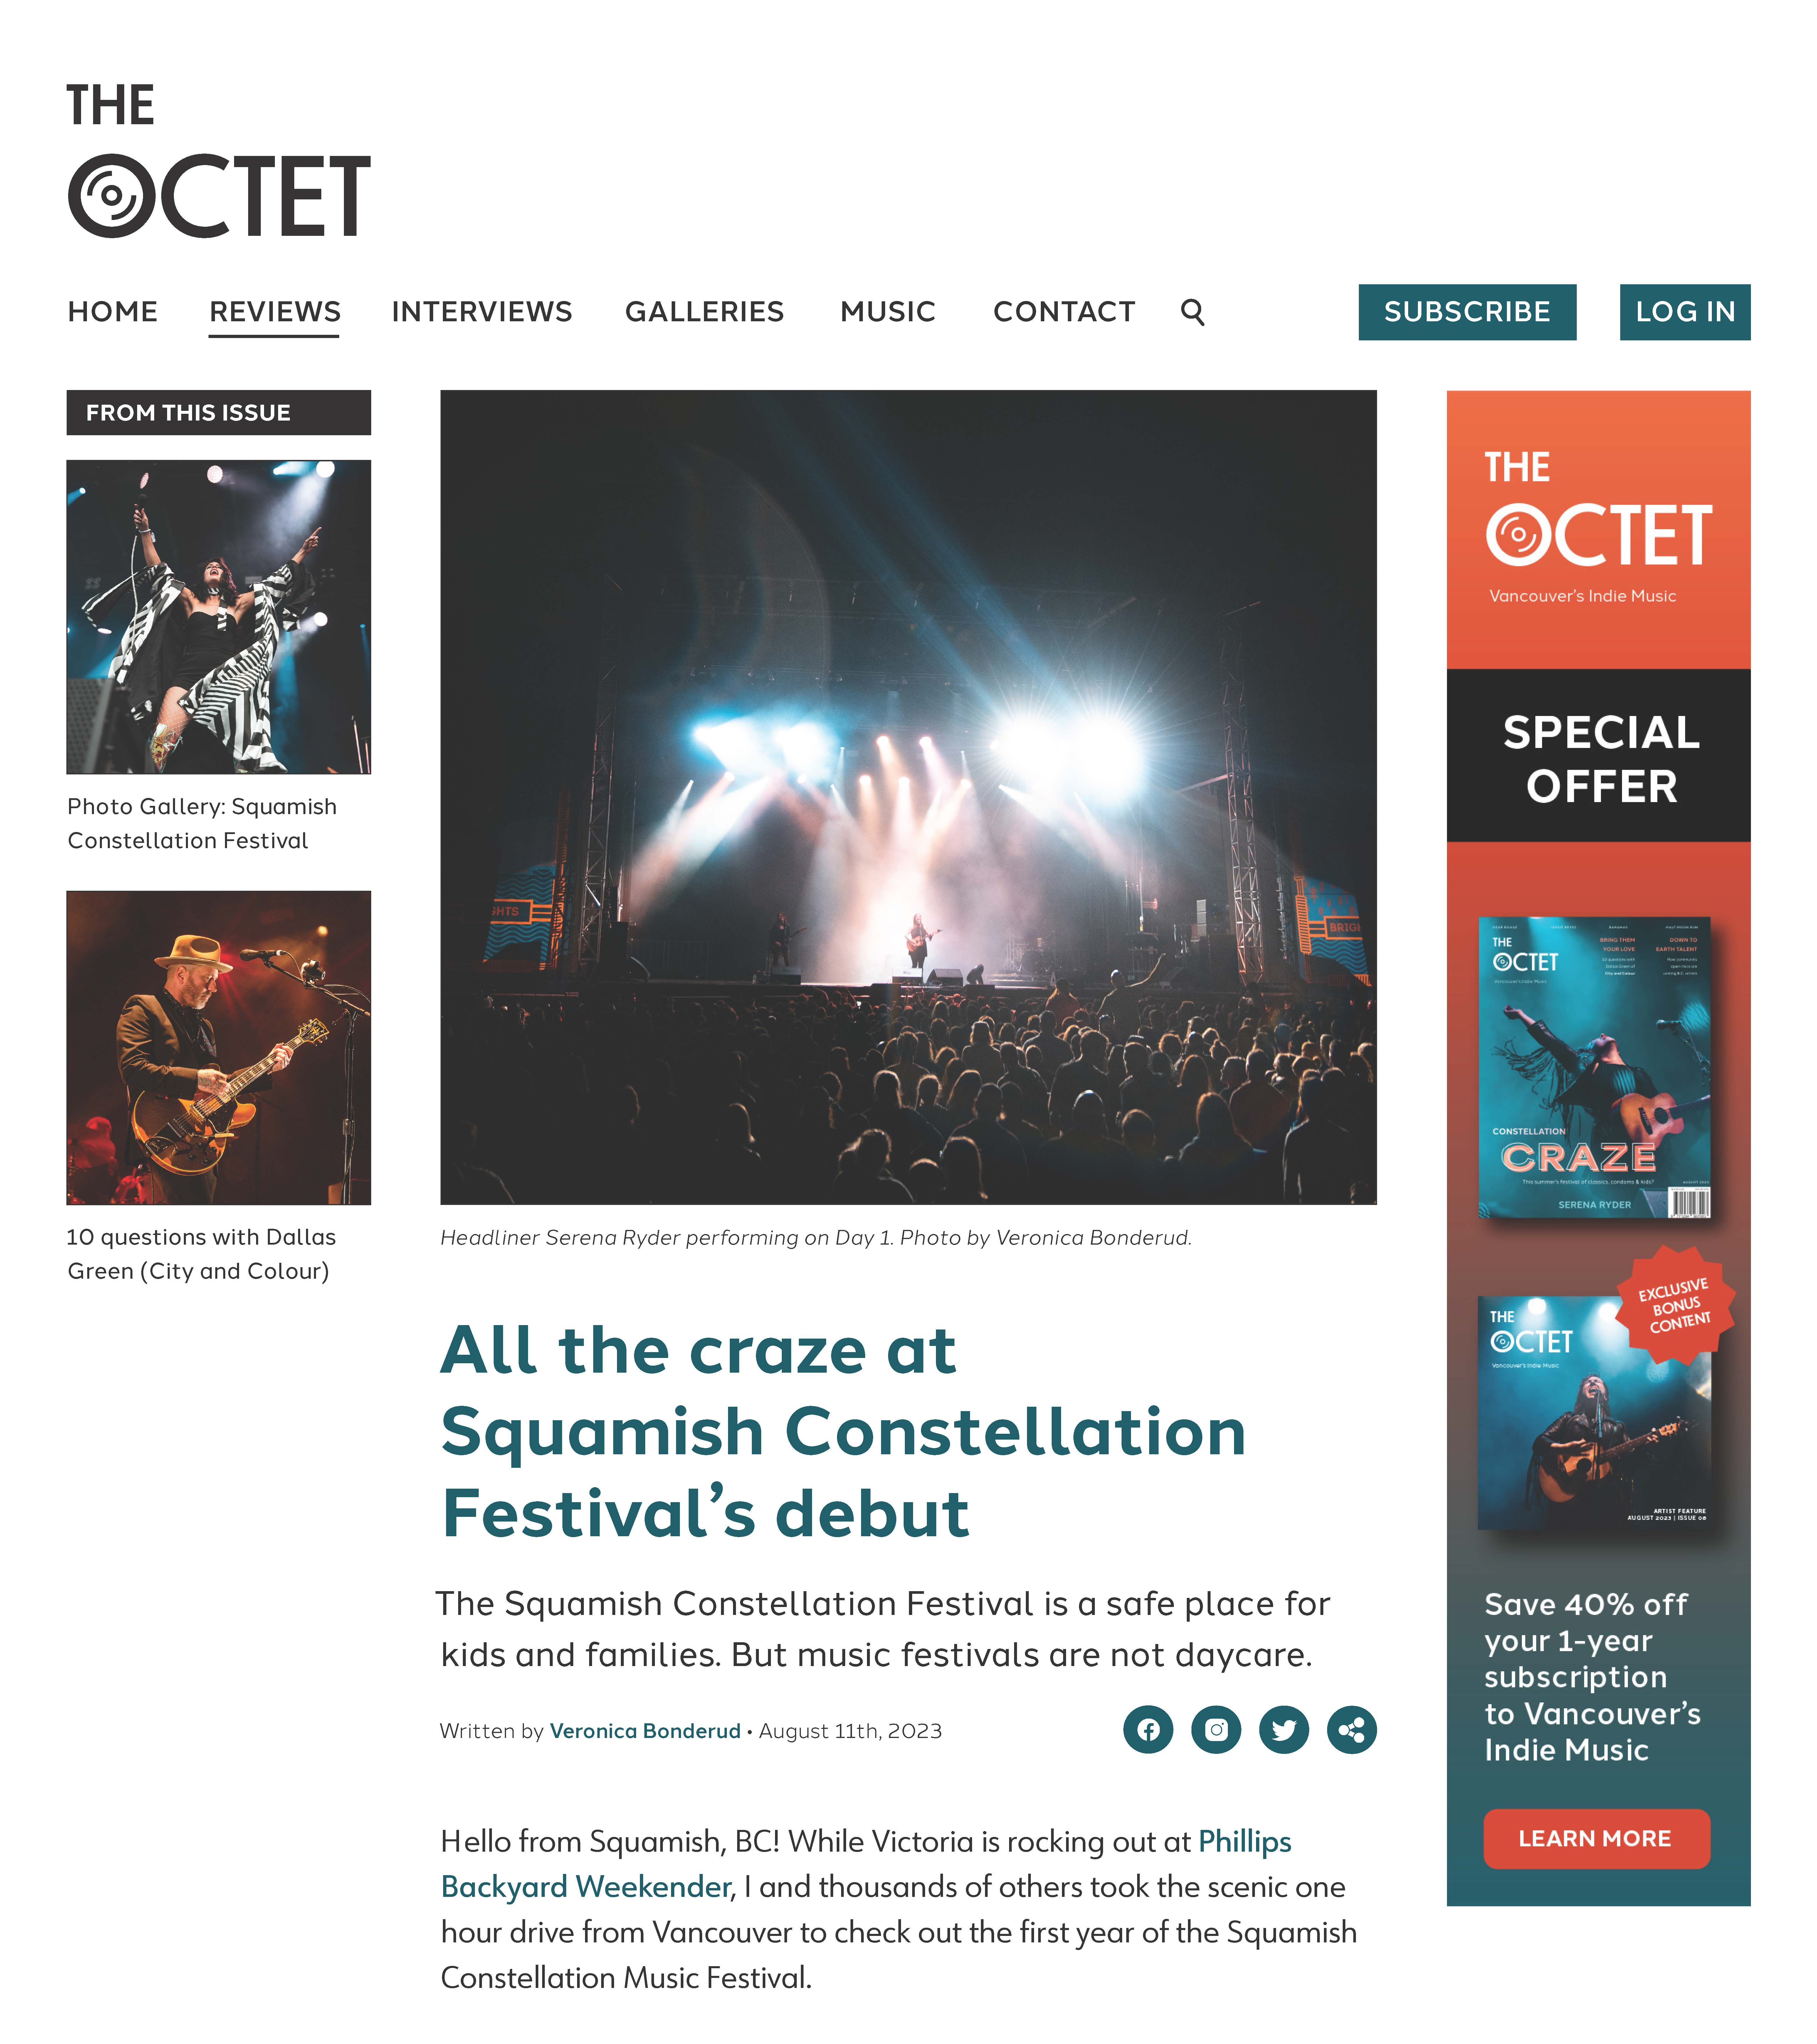 The mock-up web layout of The Octet.